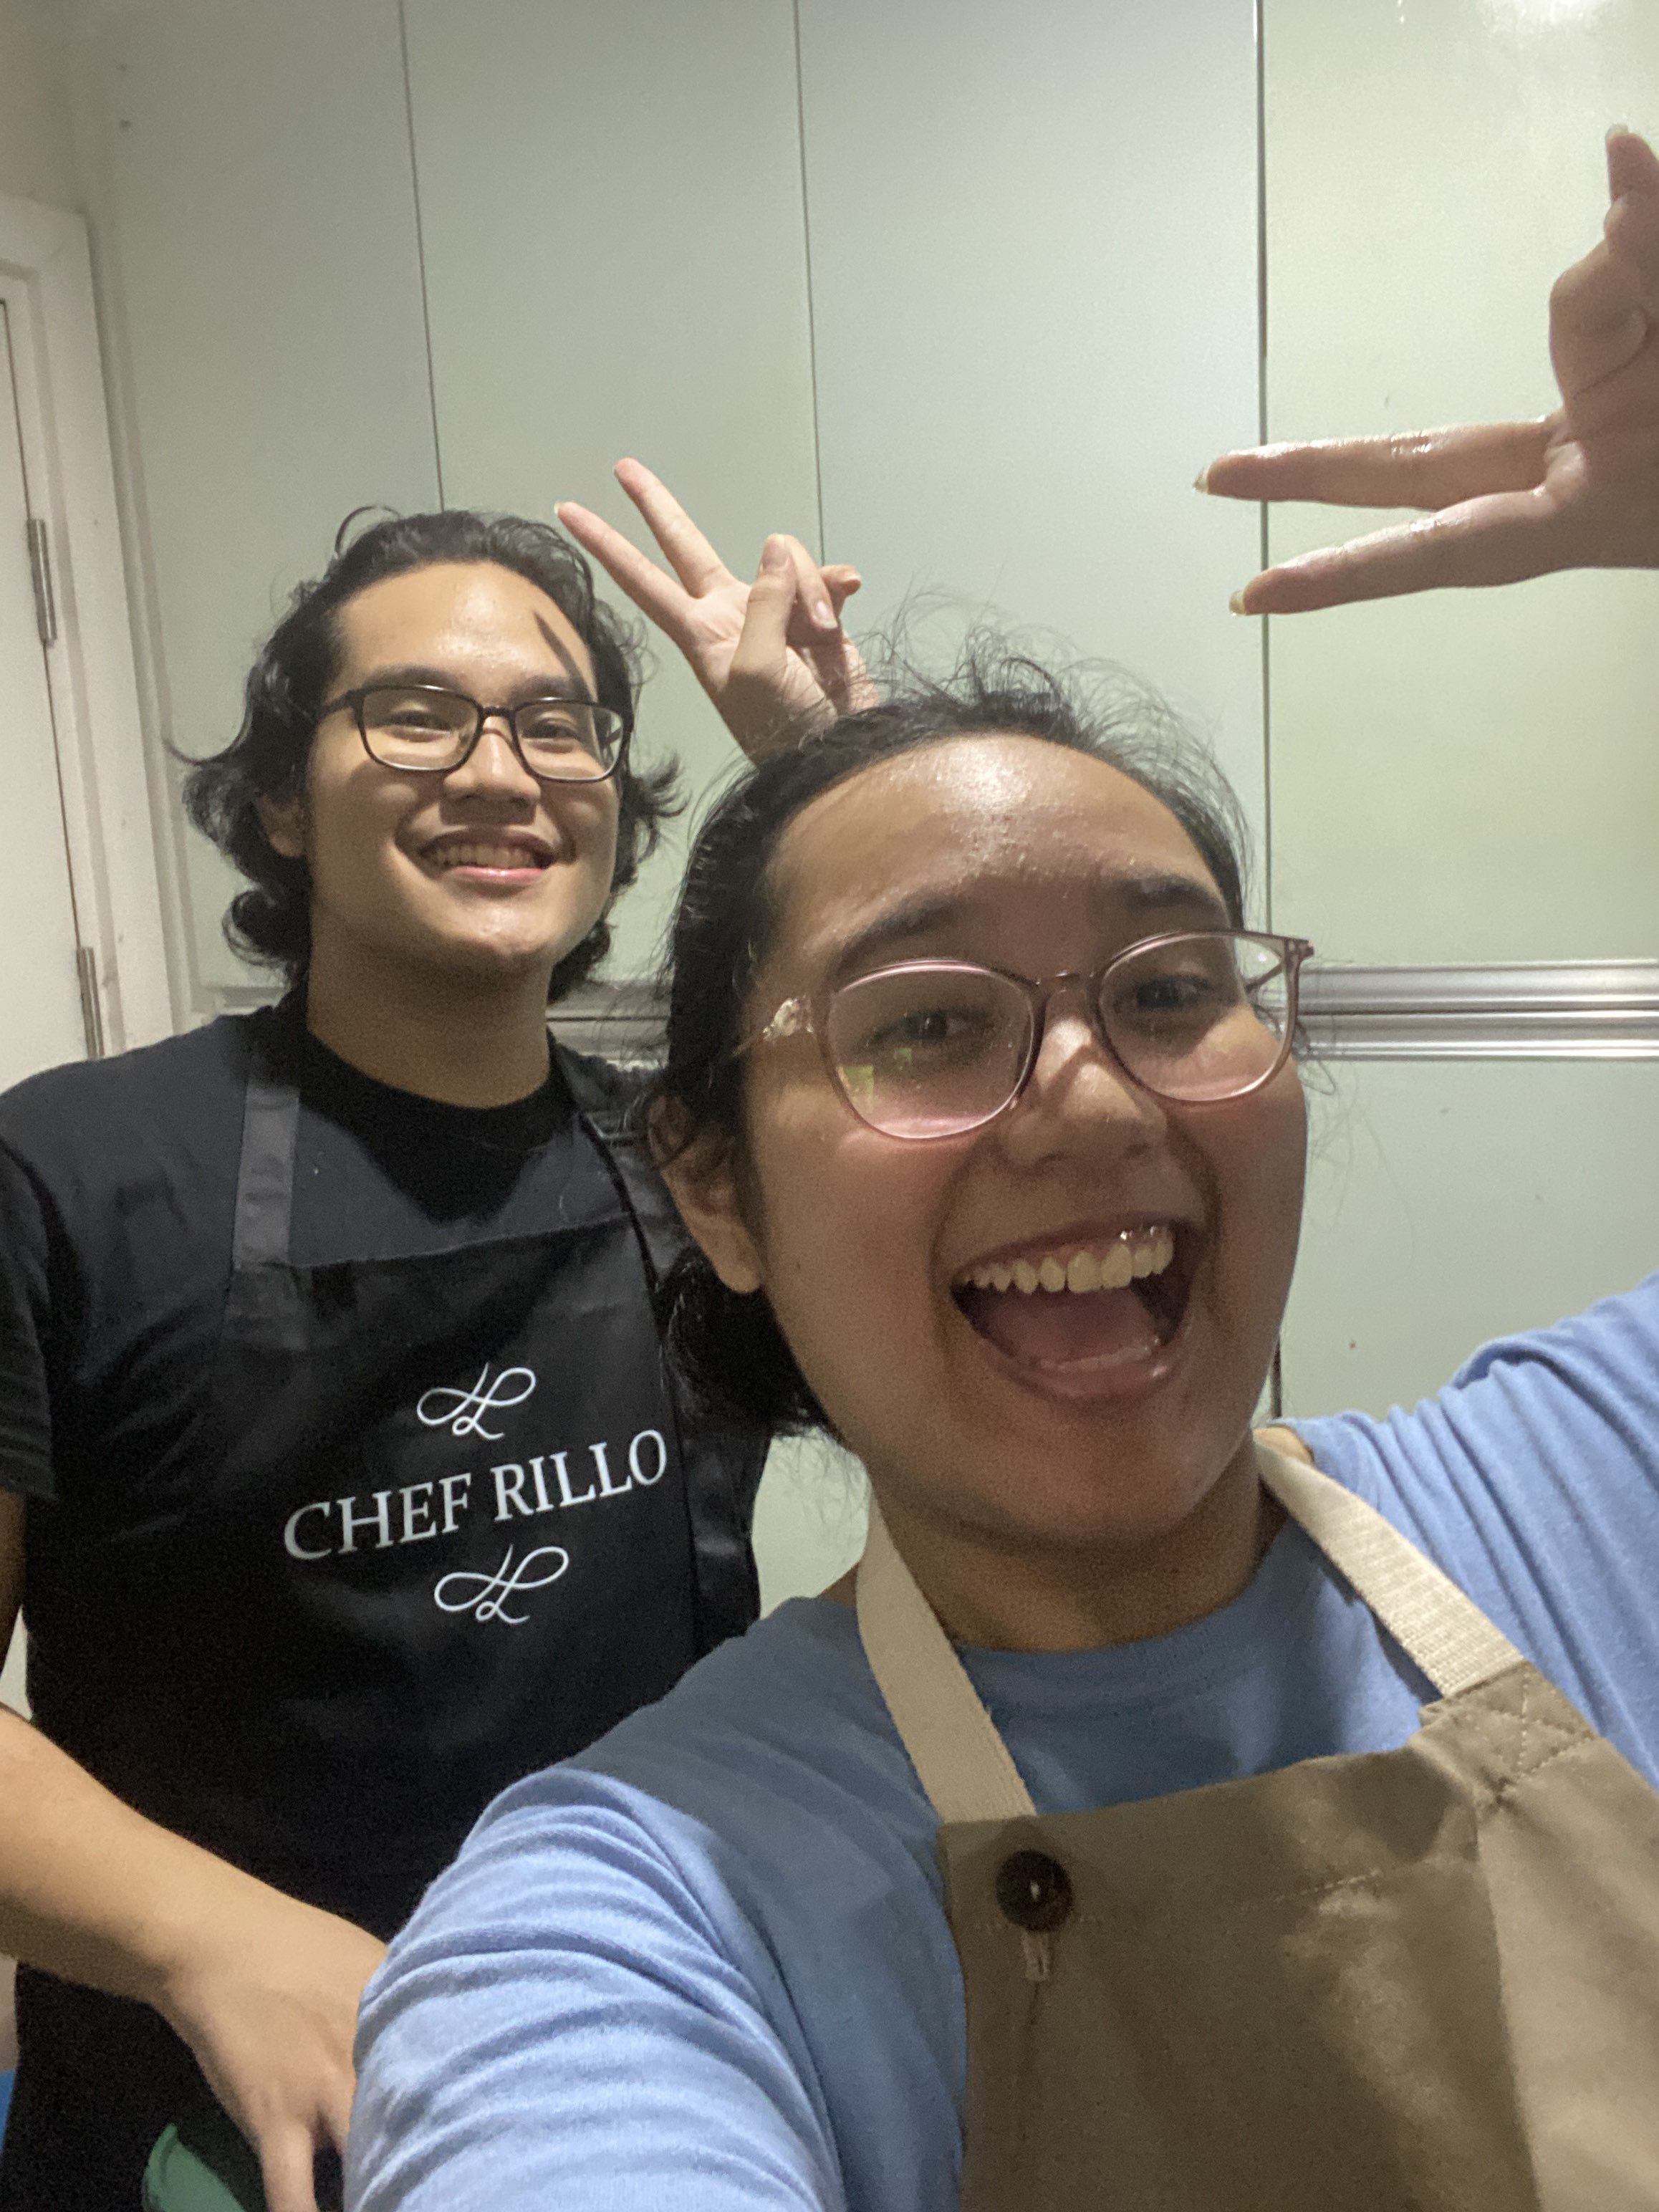 Chefs-in-crime